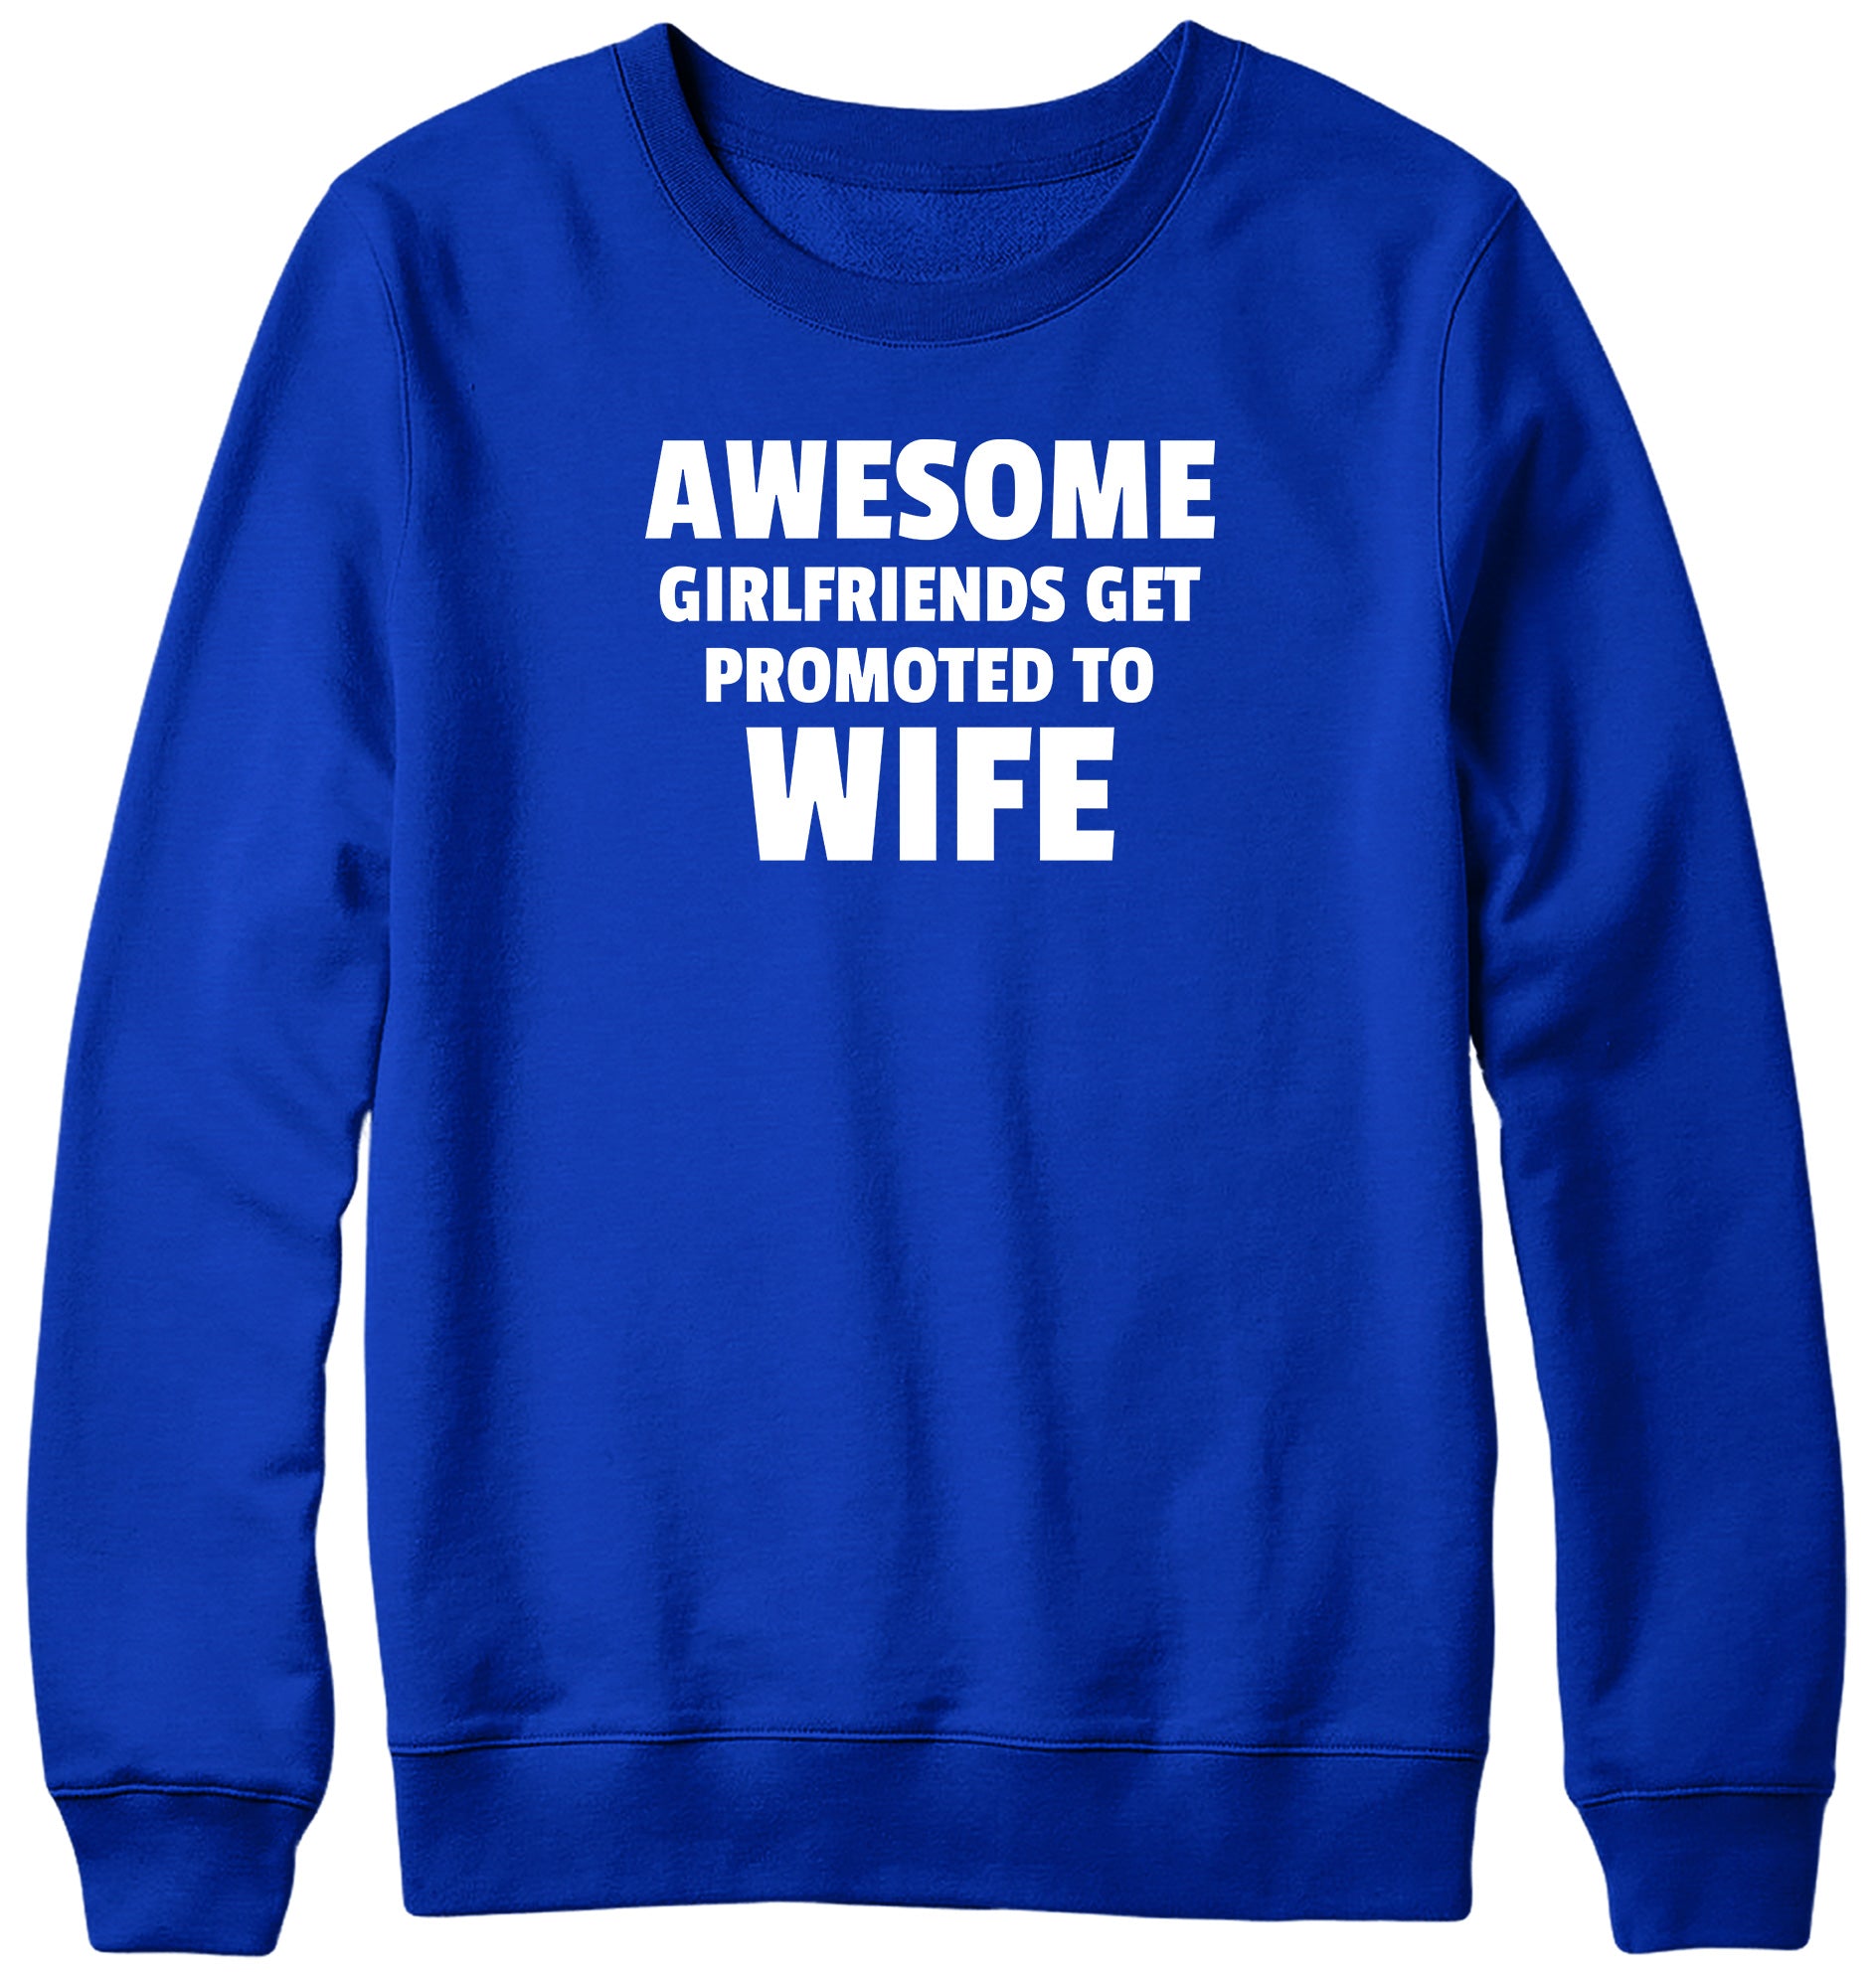 AWESOME GIRLFRIENDS GET PROMOTED TO WIFE MENS LADIES WOMENS UNISEX SWEATSHIRT SWEATER